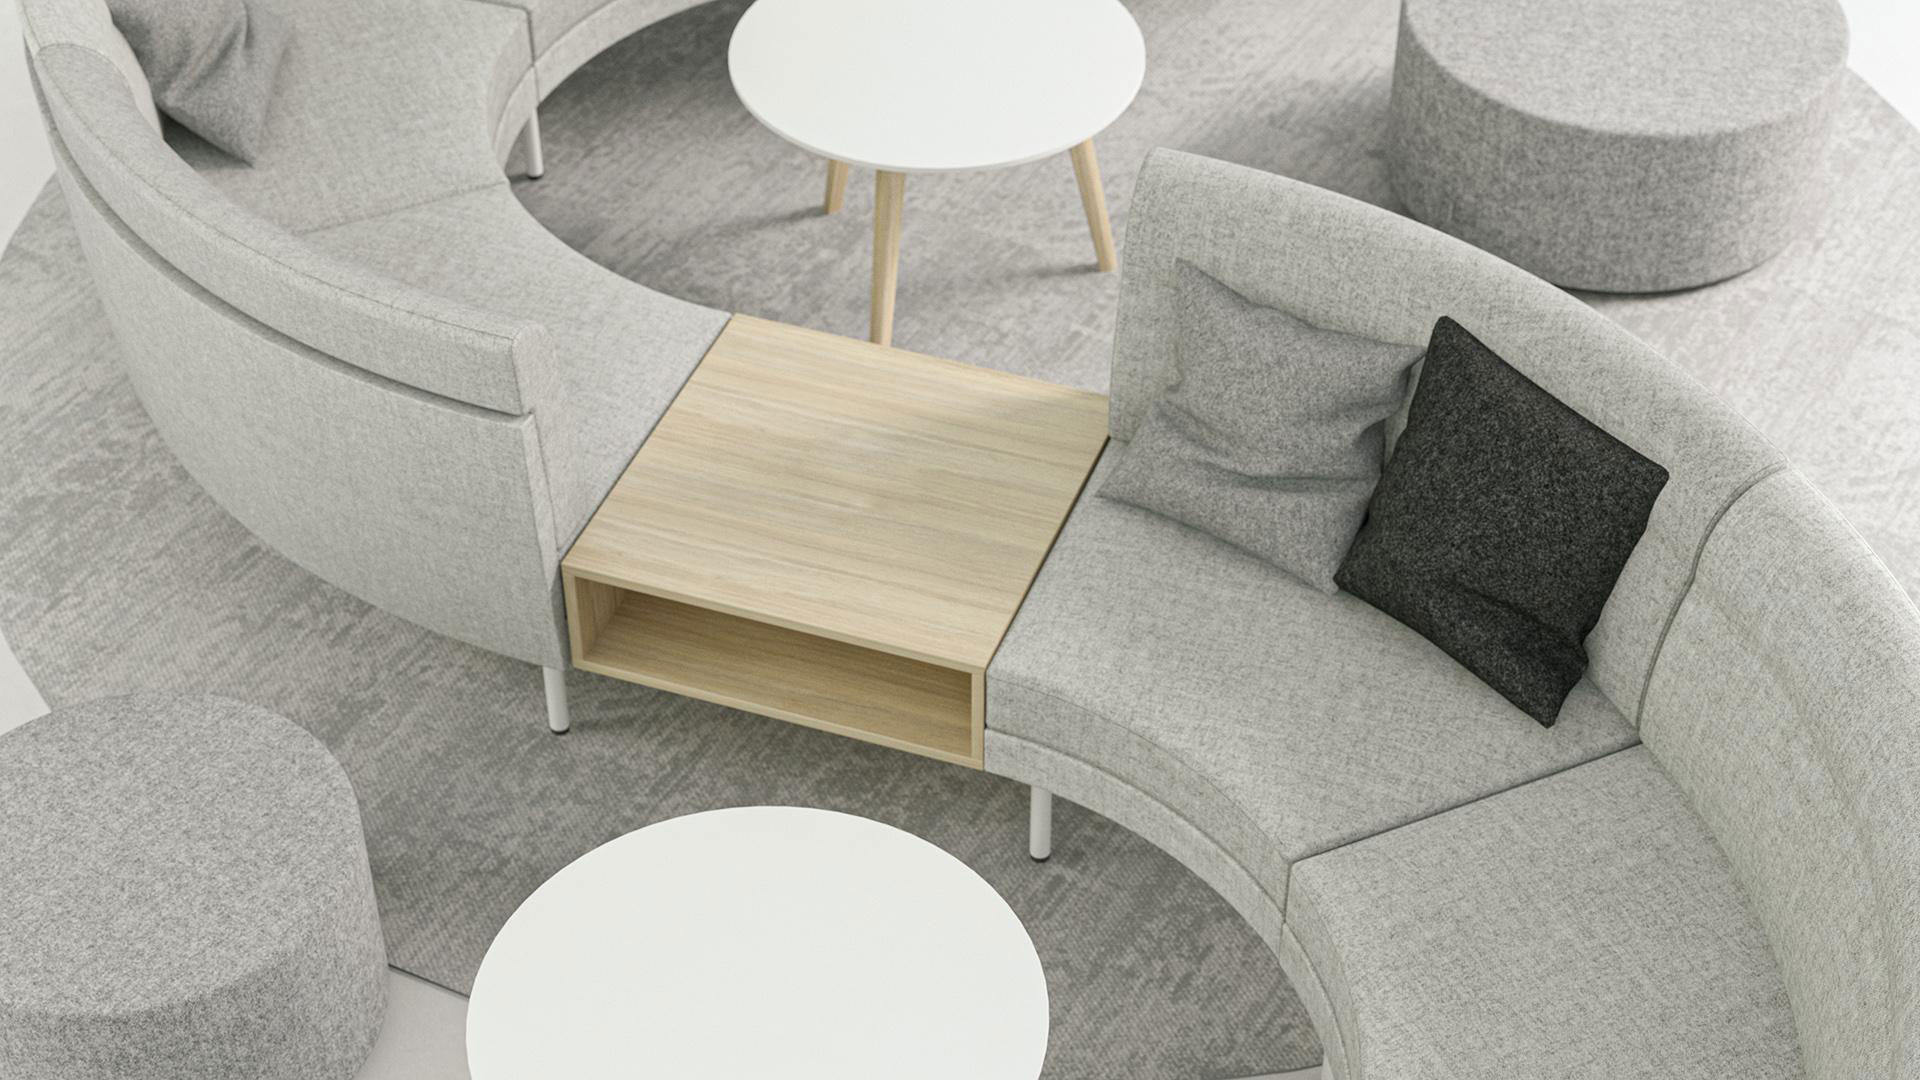 Create dynamic spaces with coffee table and storage inserts